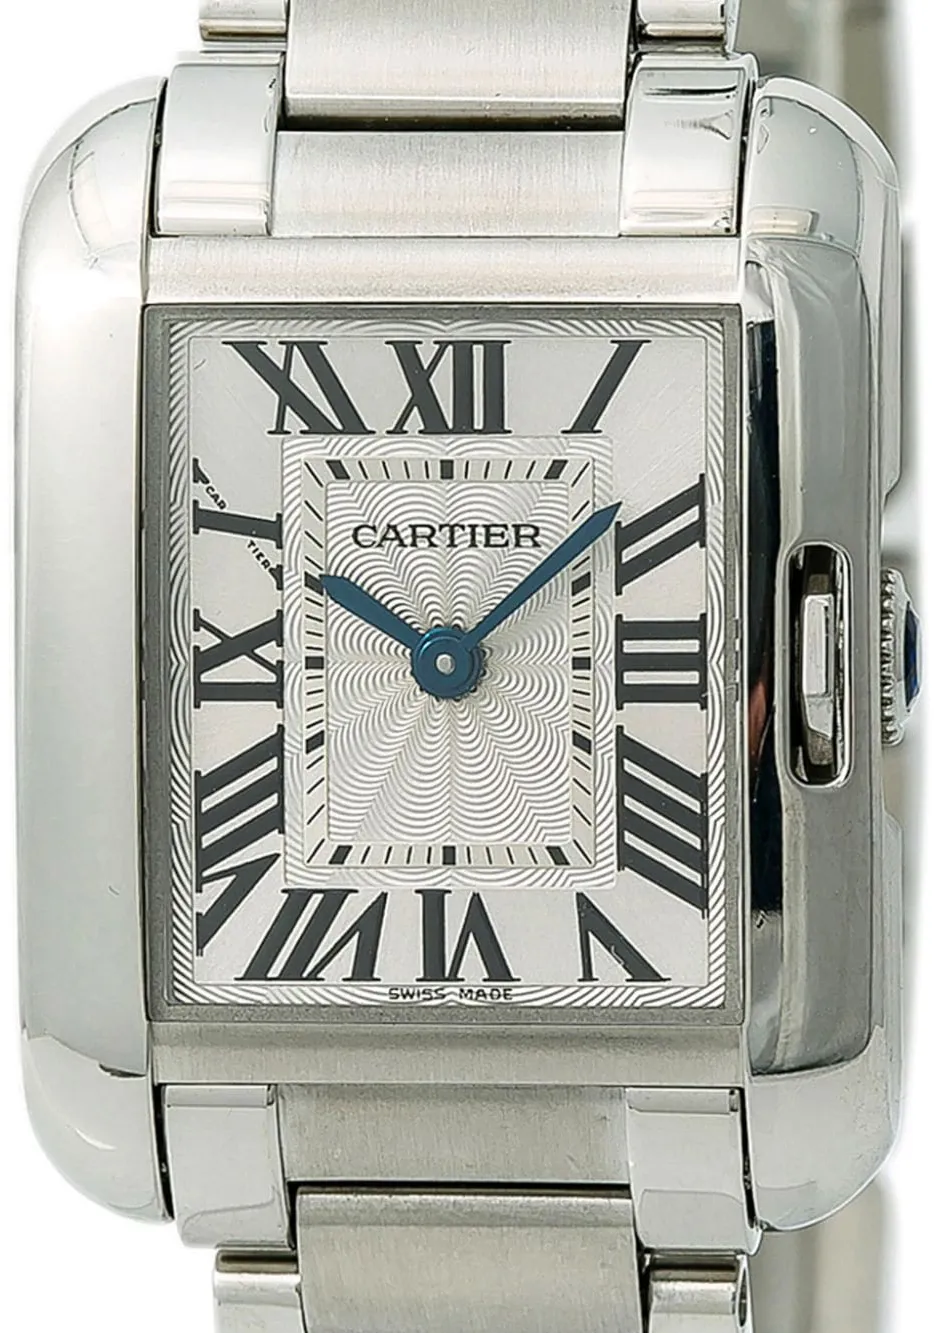 Cartier Tank W5310022 23mm Stainless steel White